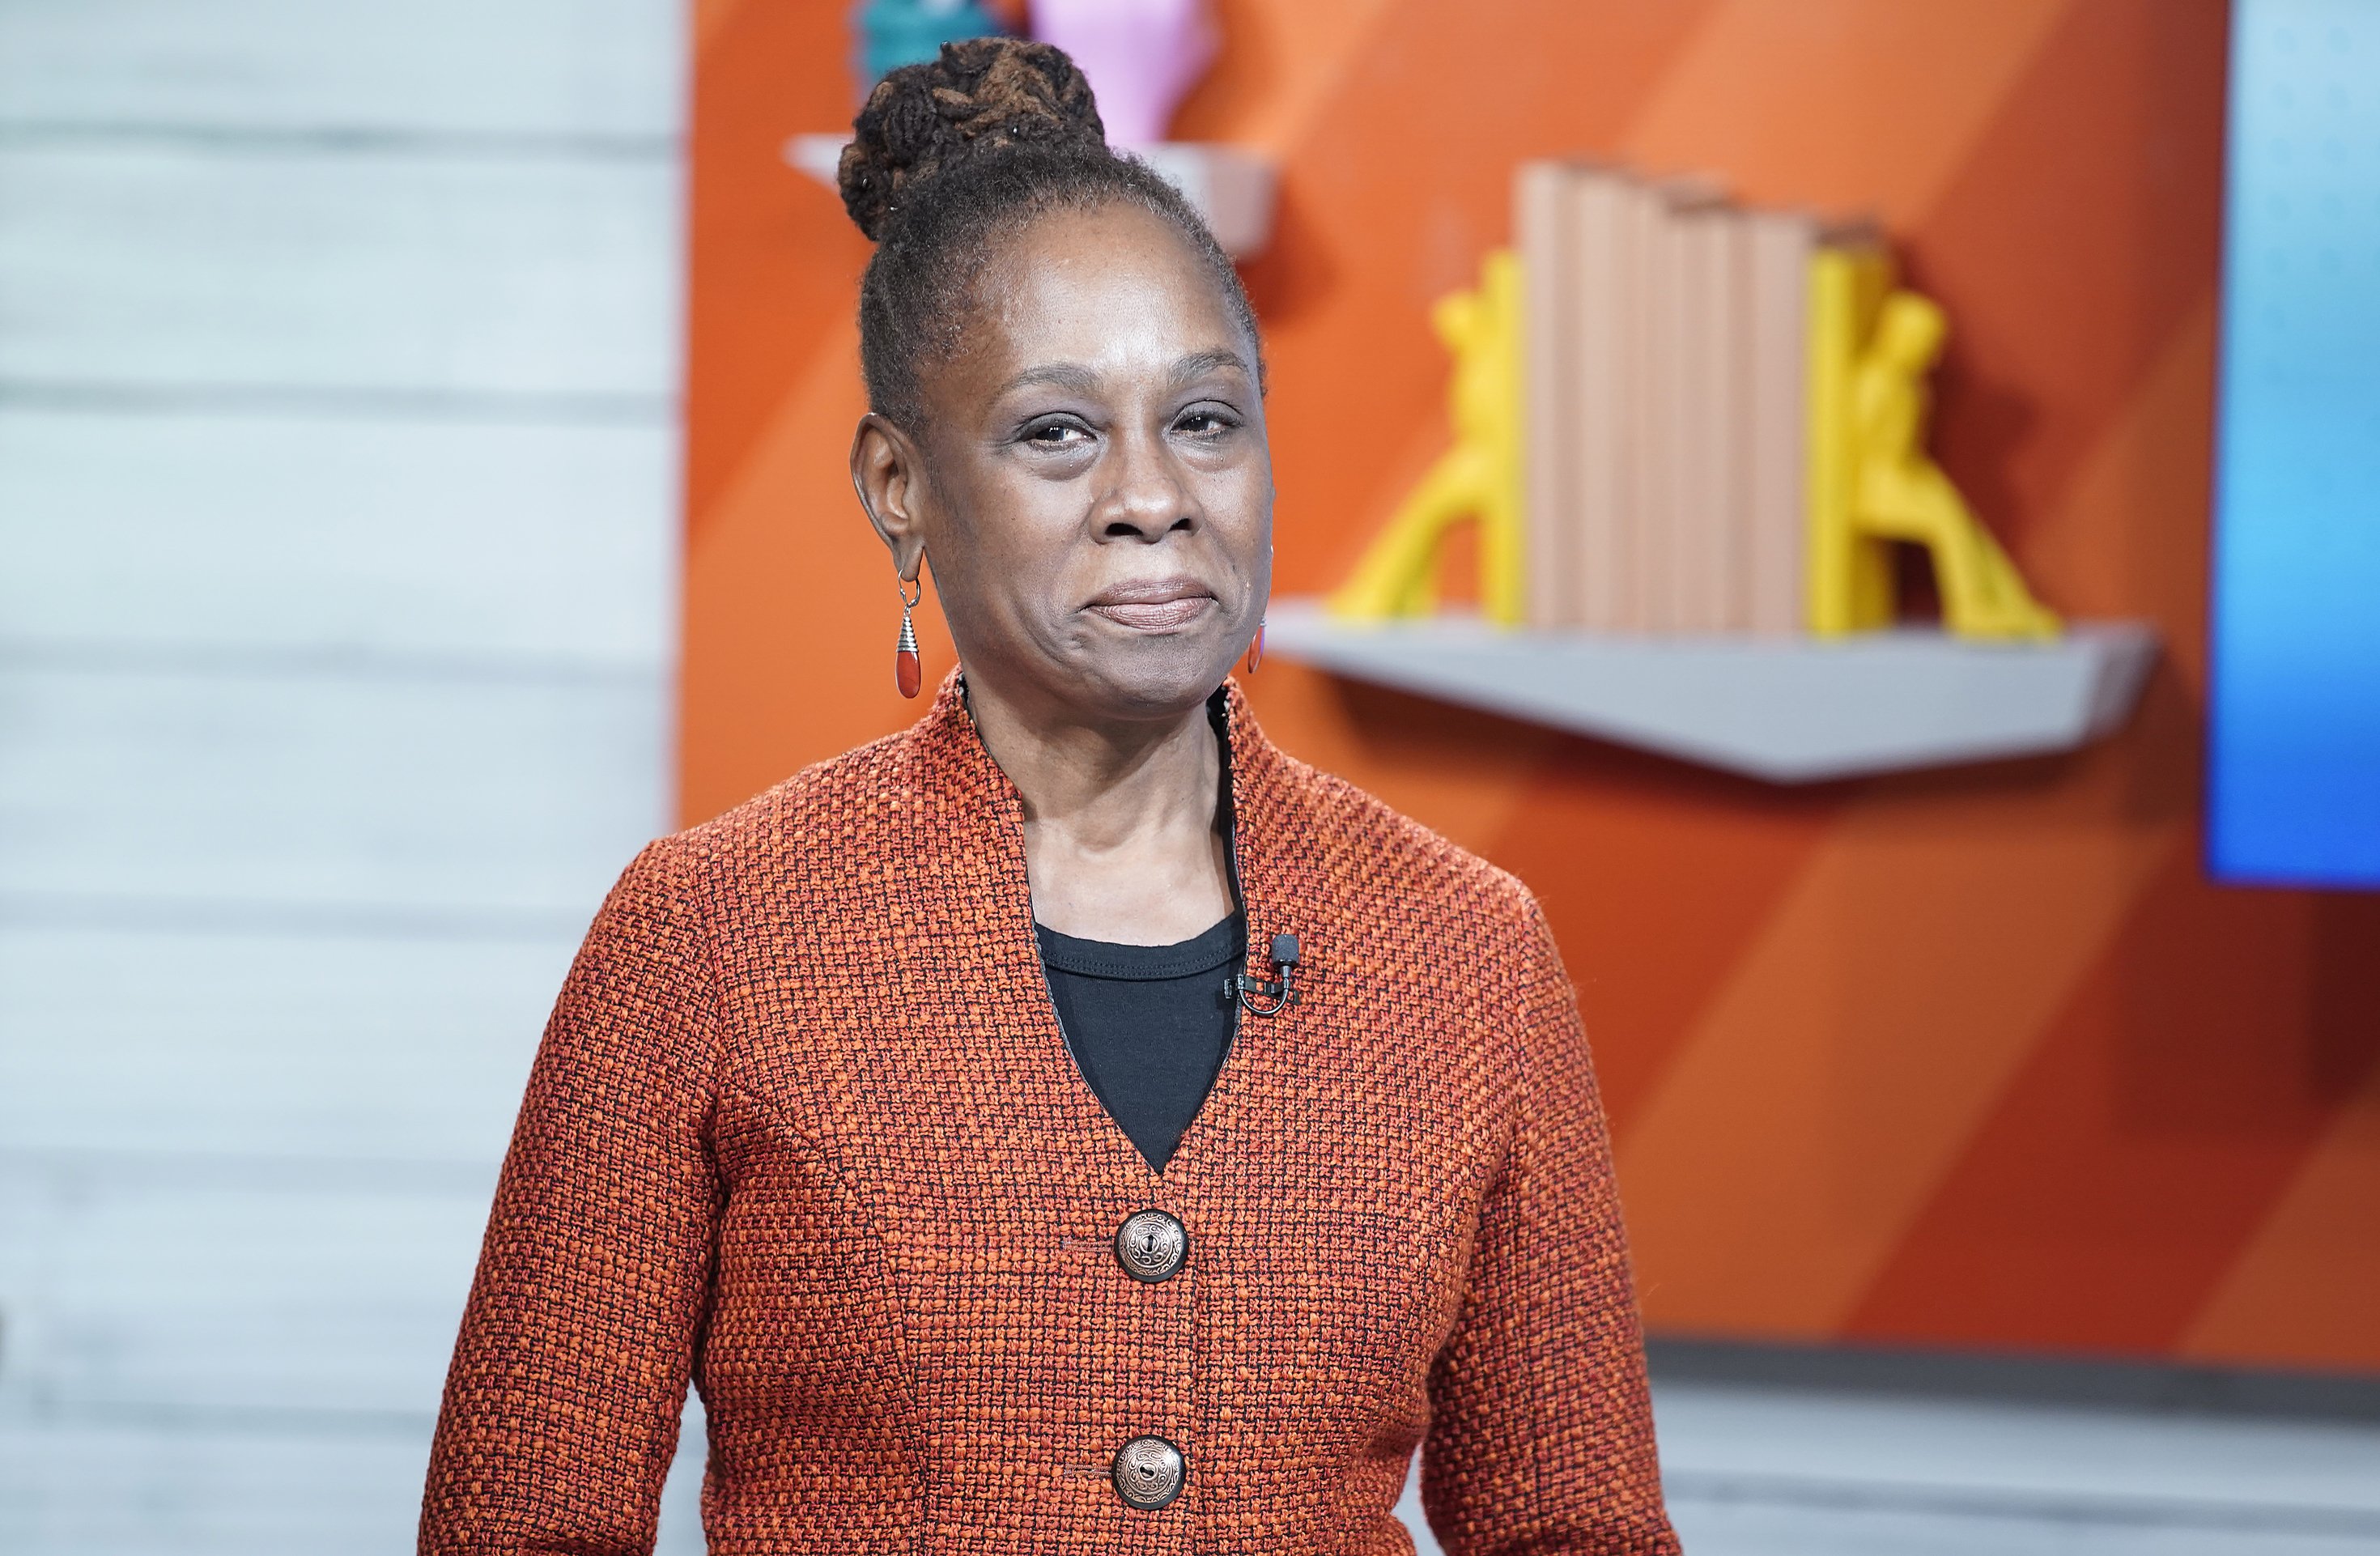 Chirlane McCray visits BuzzFeed's "AM To DM" on March 03, 2020 in New York City | Photo: GettyImages